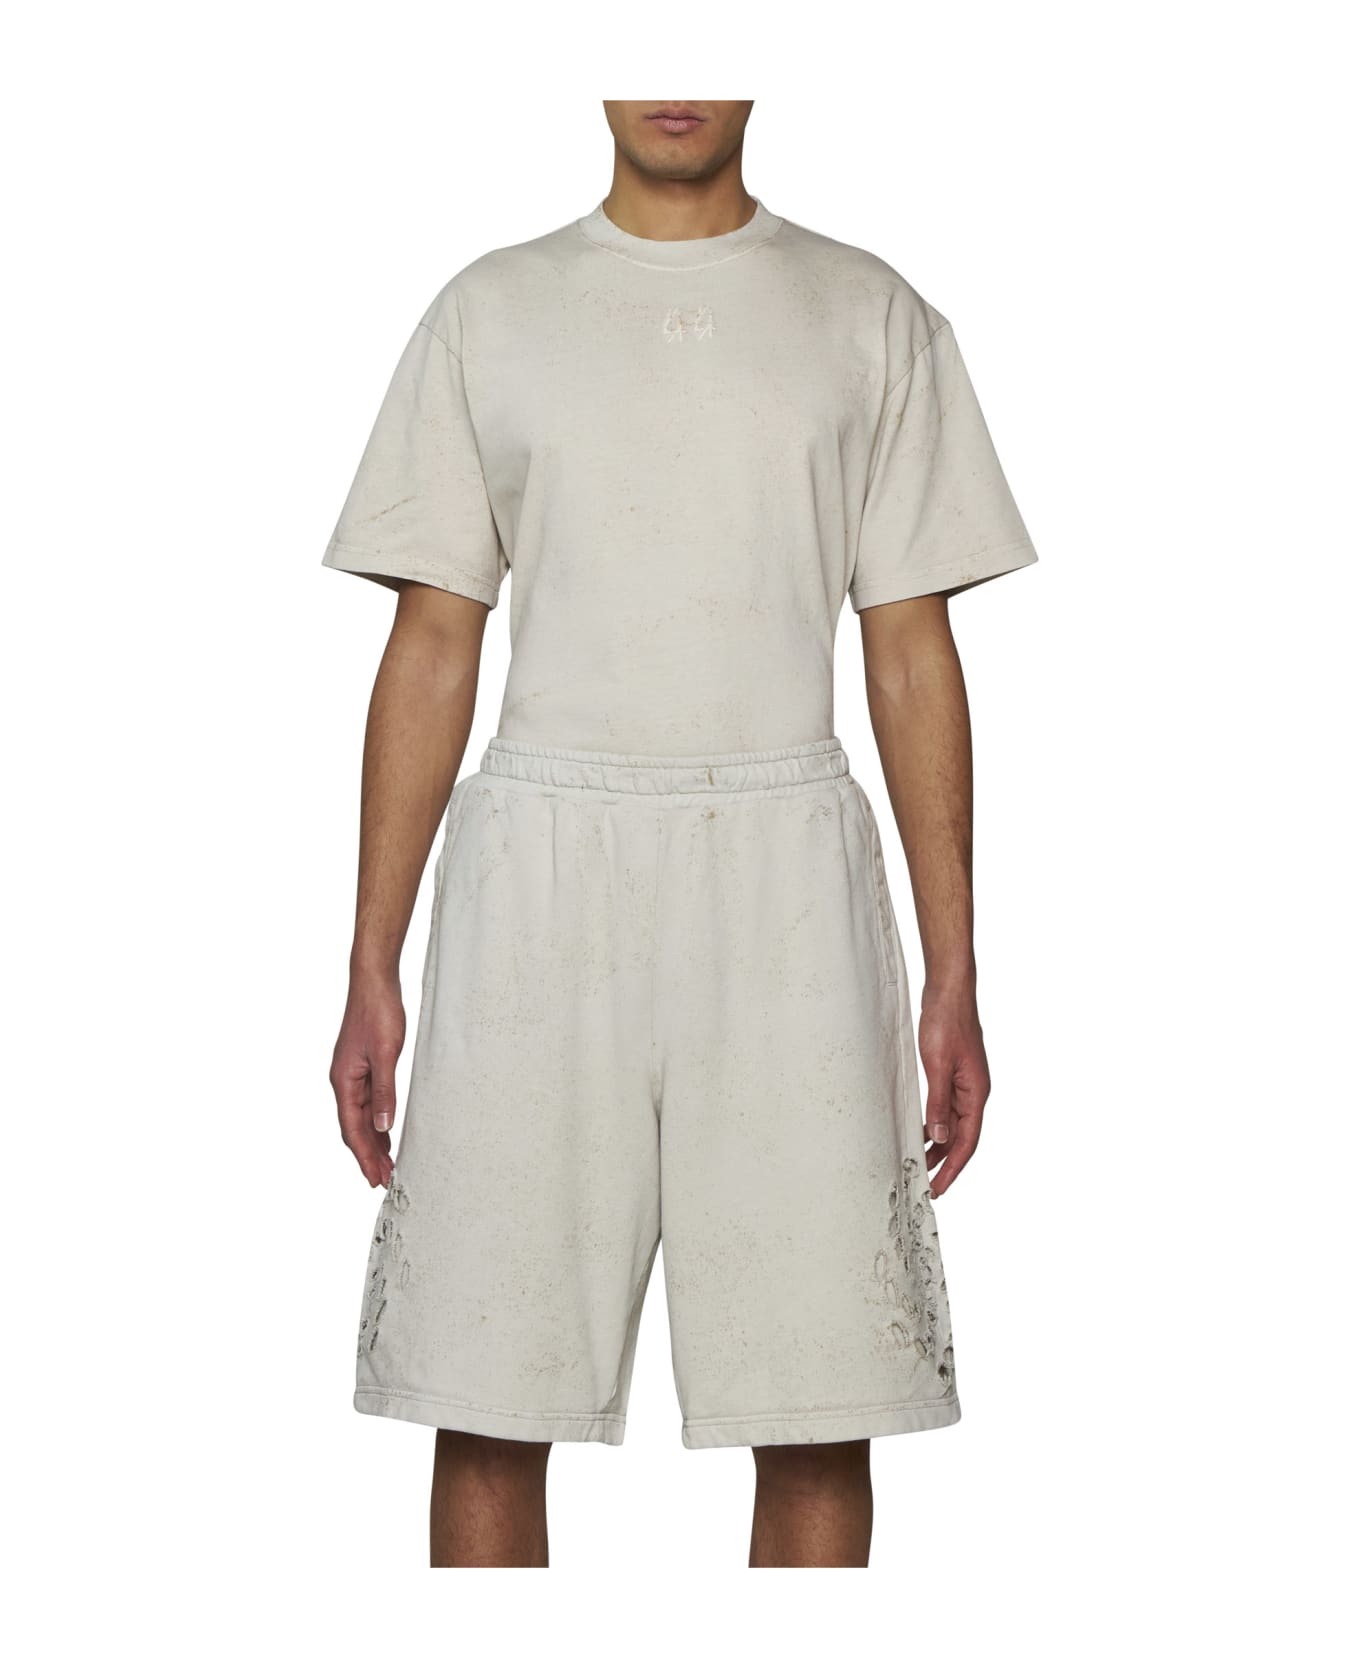 44 Label Group Shorts - Dirty white+gyps